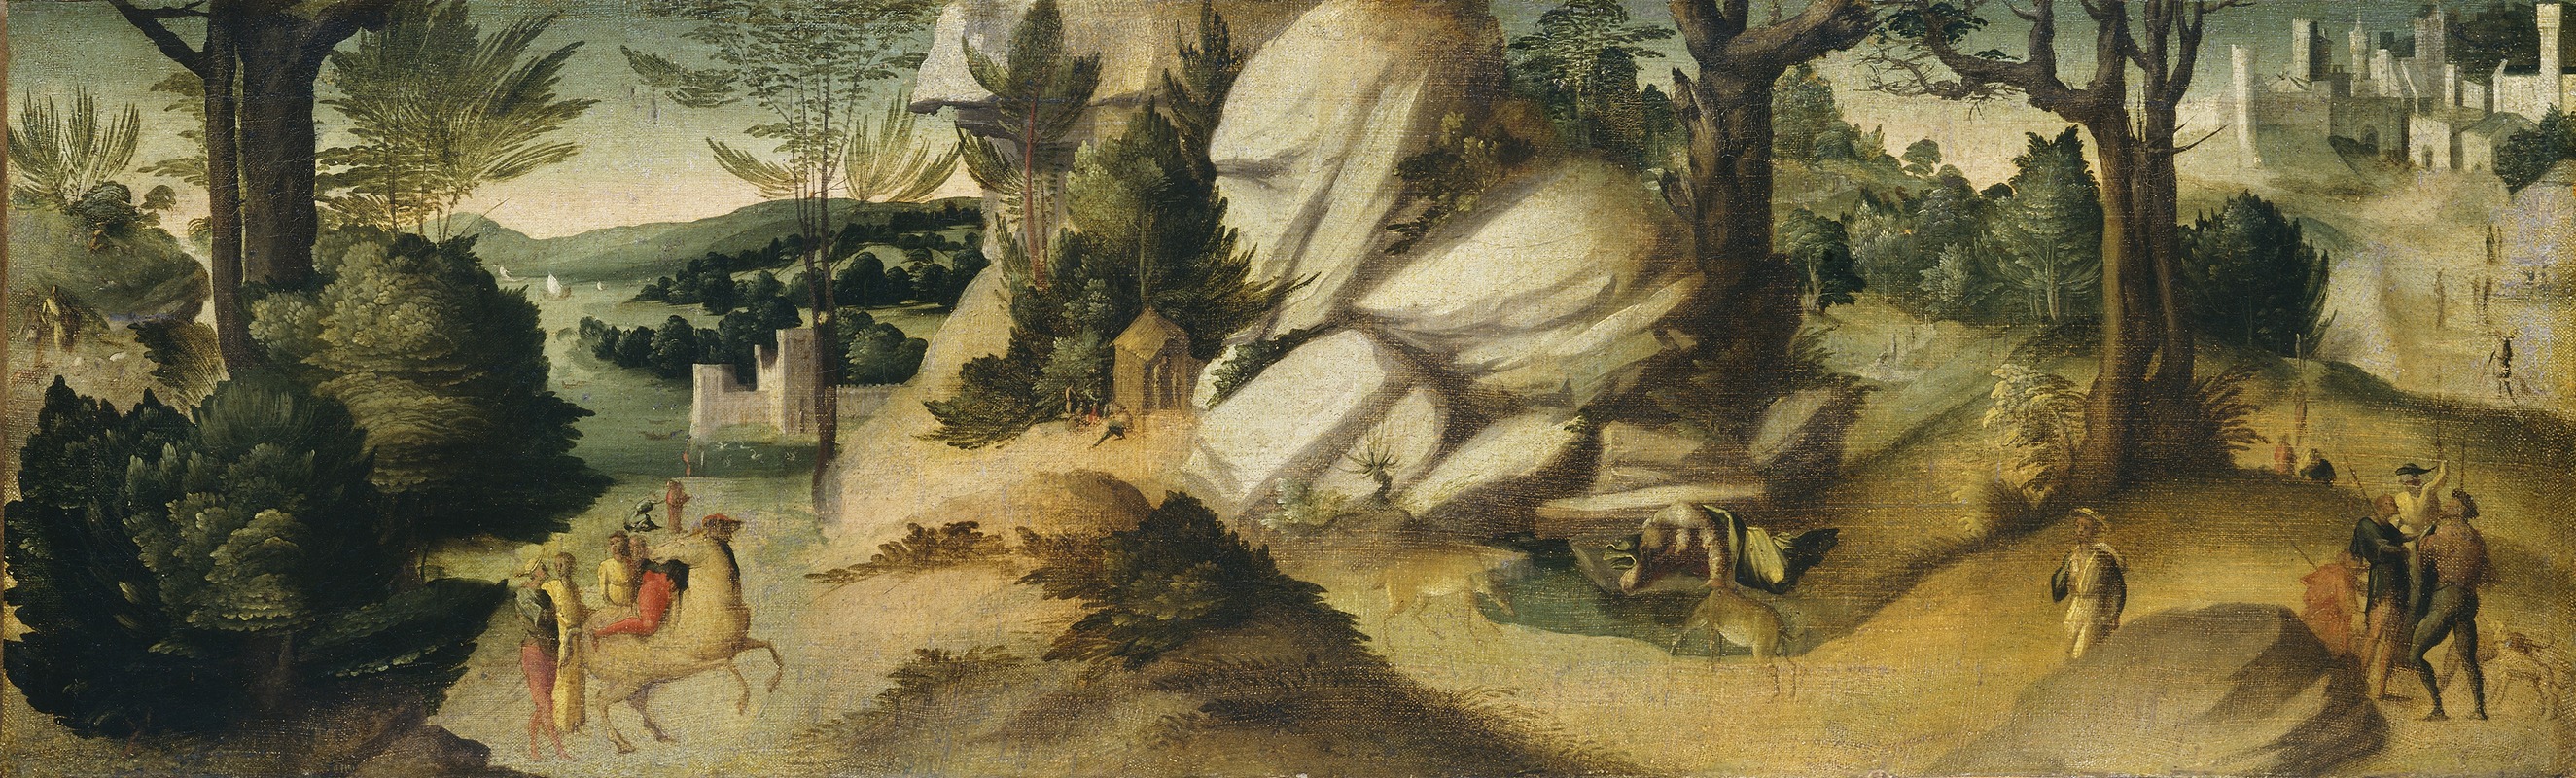 Giovanni Larciani (Master of the Kress Landscapes) - Scenes from a Legend